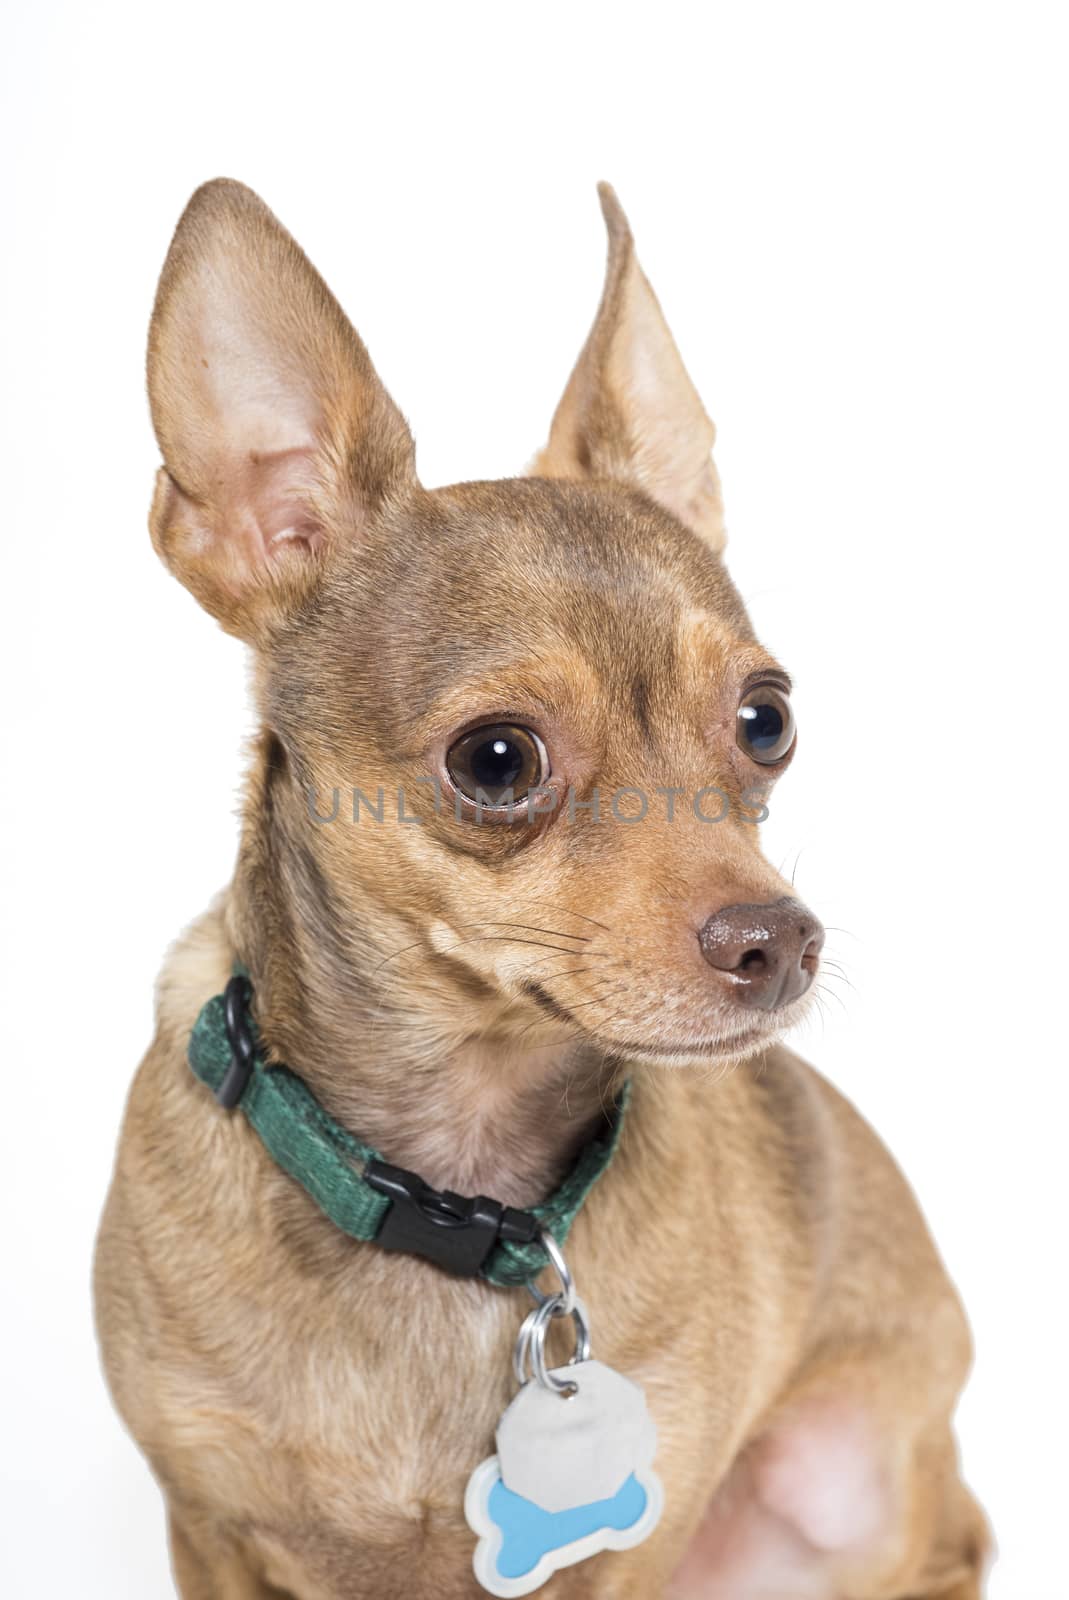 Chihuahua dog isolated against a white background by Njean